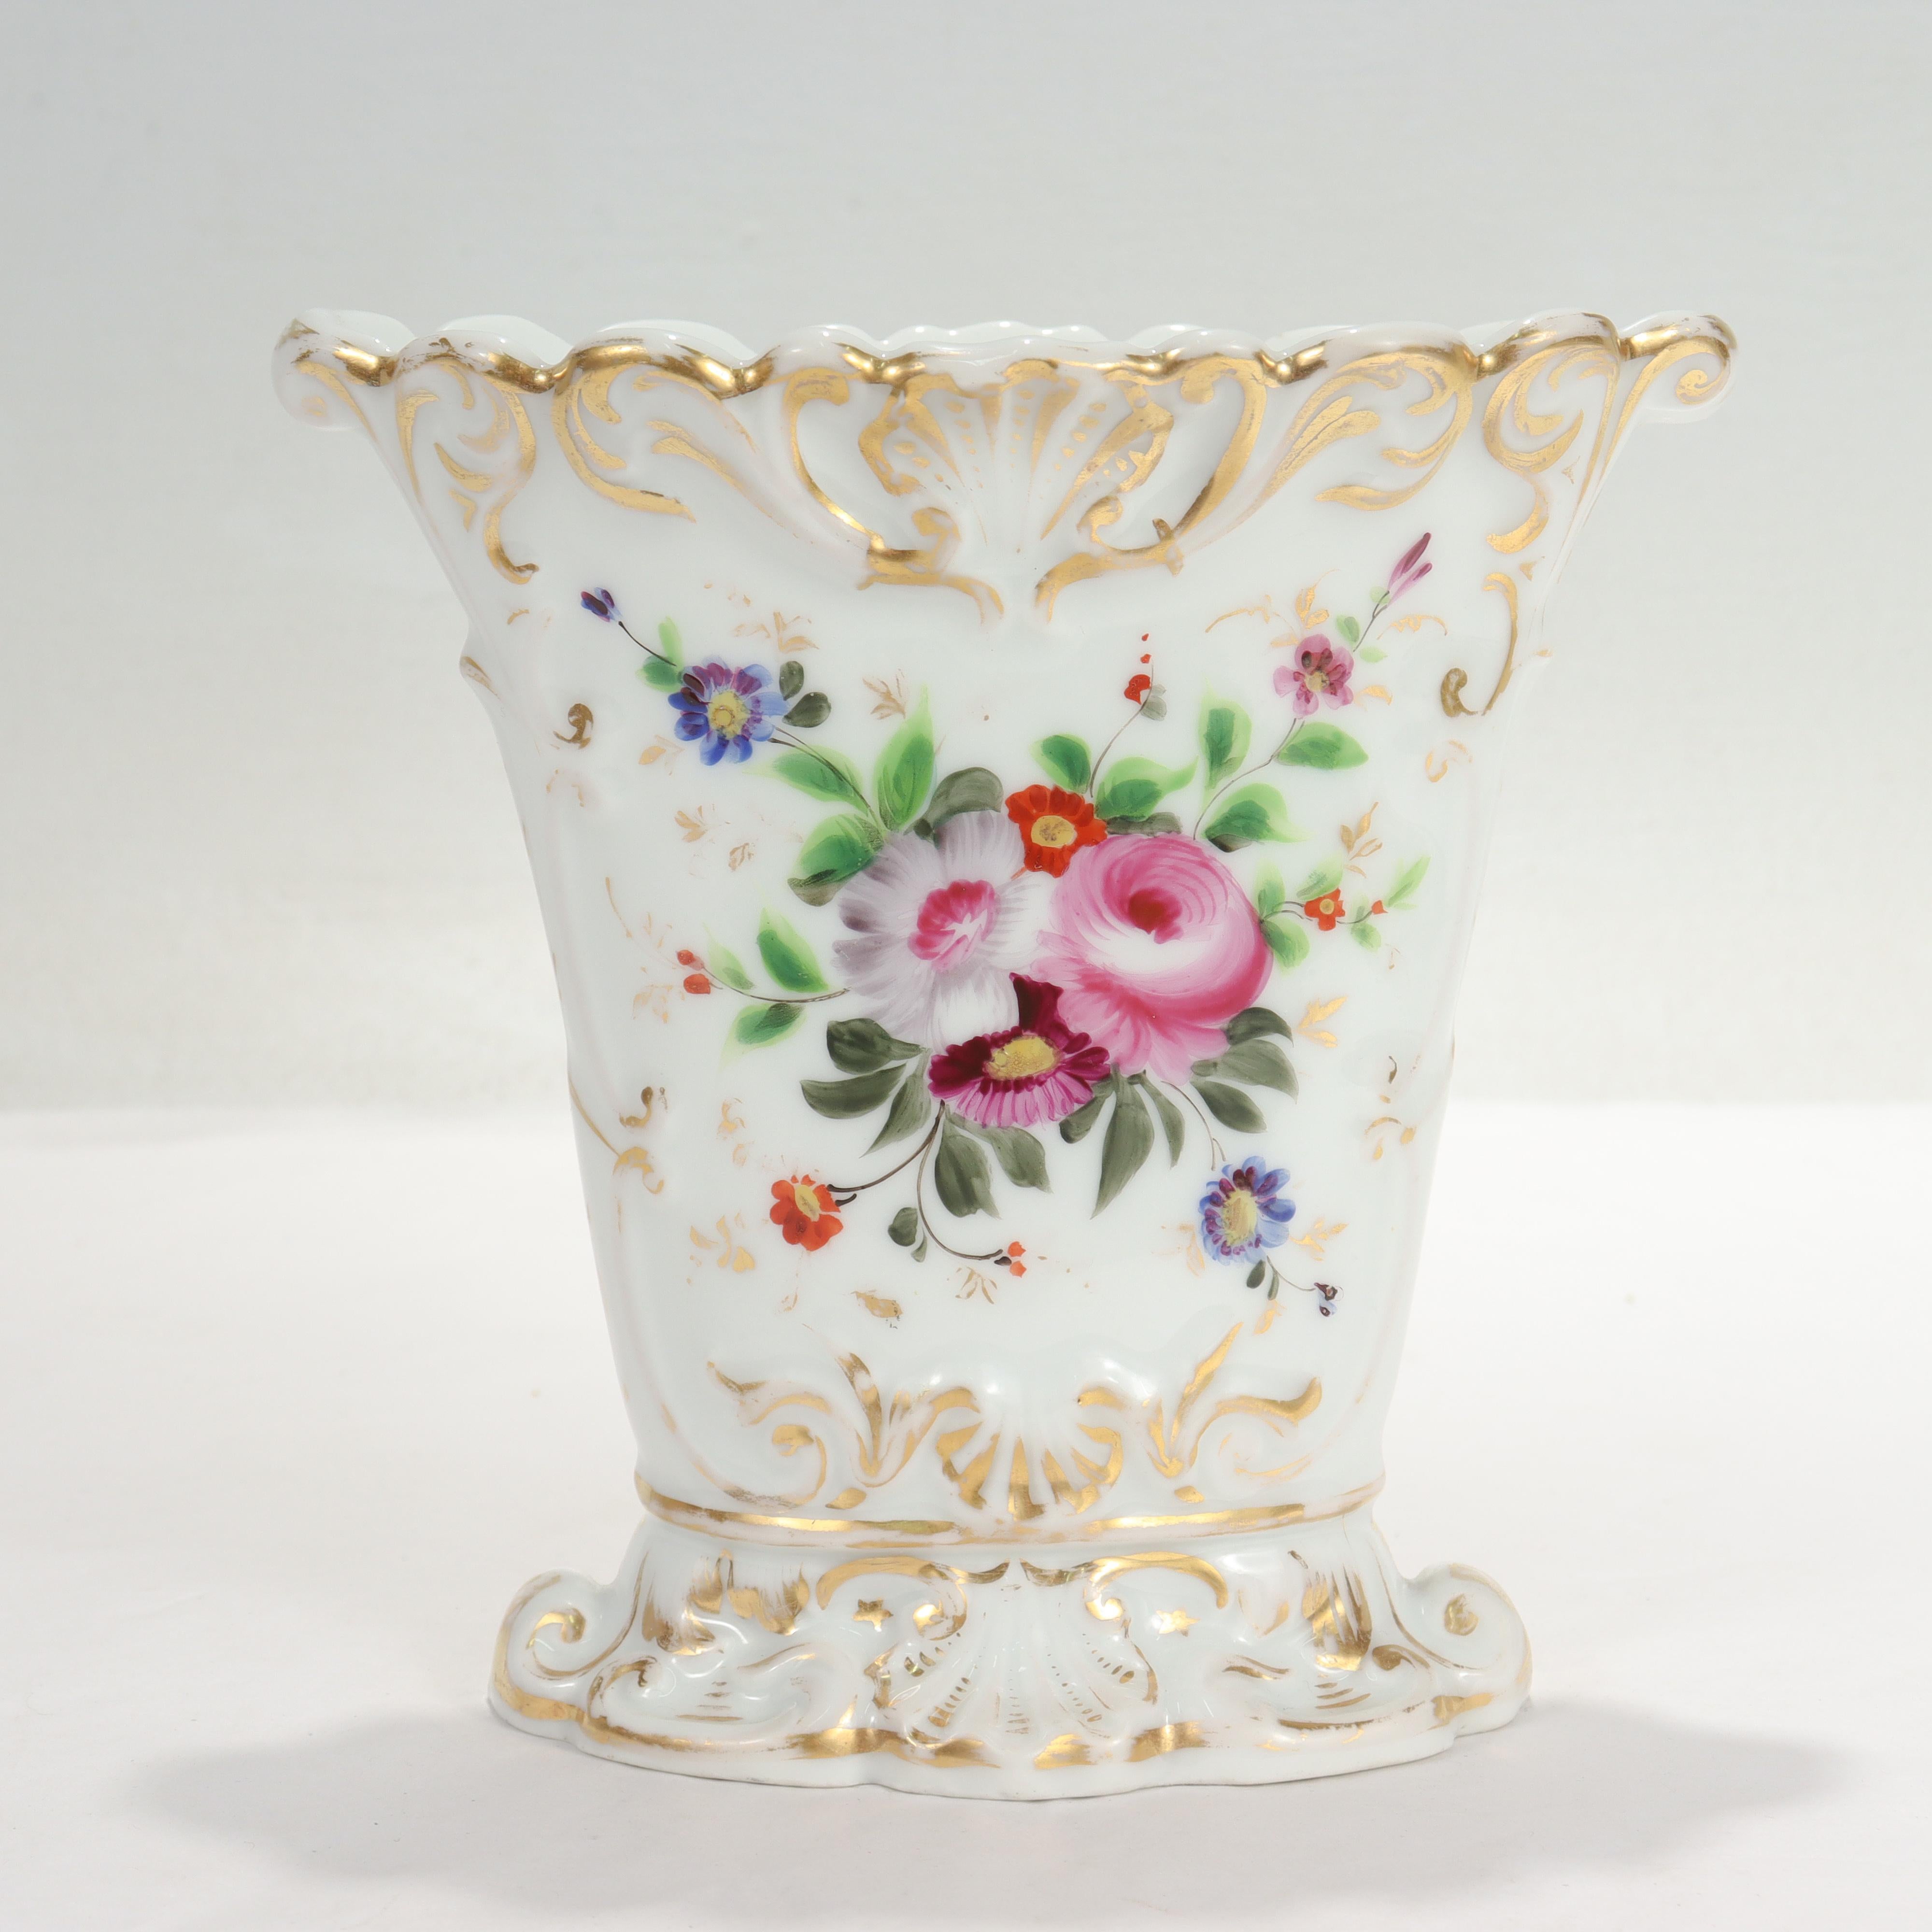 A fine antique French porcelain vase.

With extensive gilding and painted floral decoration to each side.

Simply a great piece of Old Paris porcelain!

Date:
19th Century

Overall Condition:
It is in overall good, as-pictured, used estate